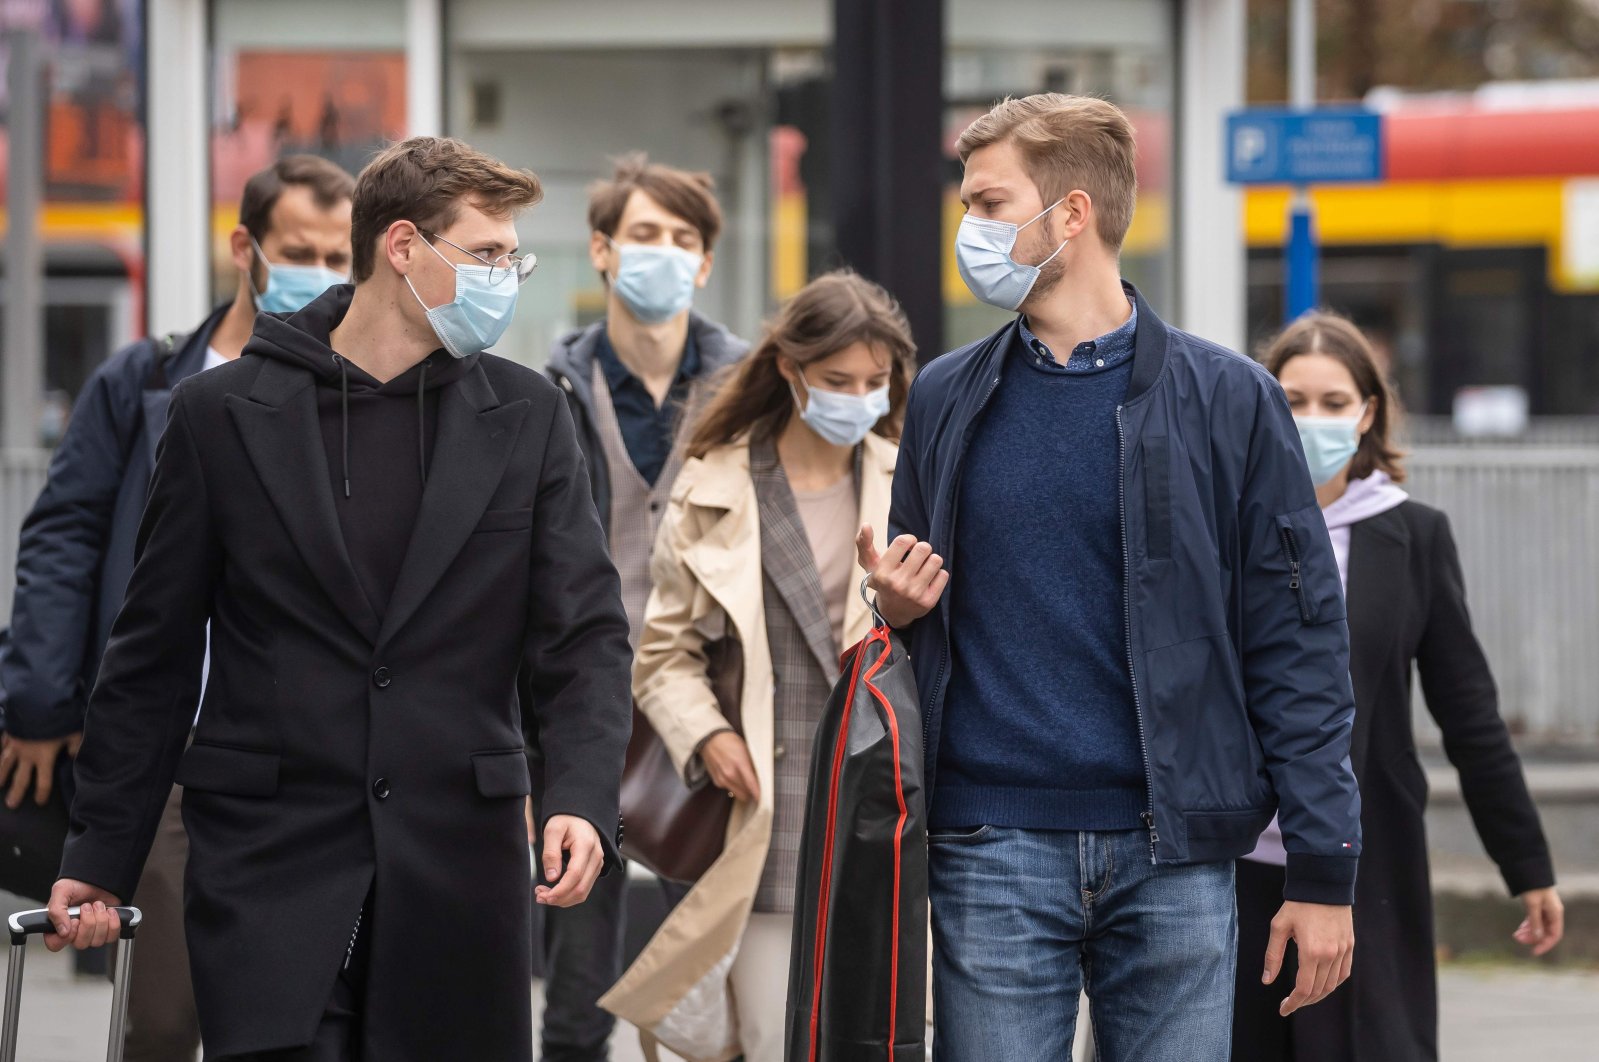 People wearing protective masks are seen on the streets of Warsaw after the Polish government tightened restrictions in the fight against the coronavirus and introduced mandatory mouth and nose coverage in public places, Oct. 10, 2020. (AFP Photo)